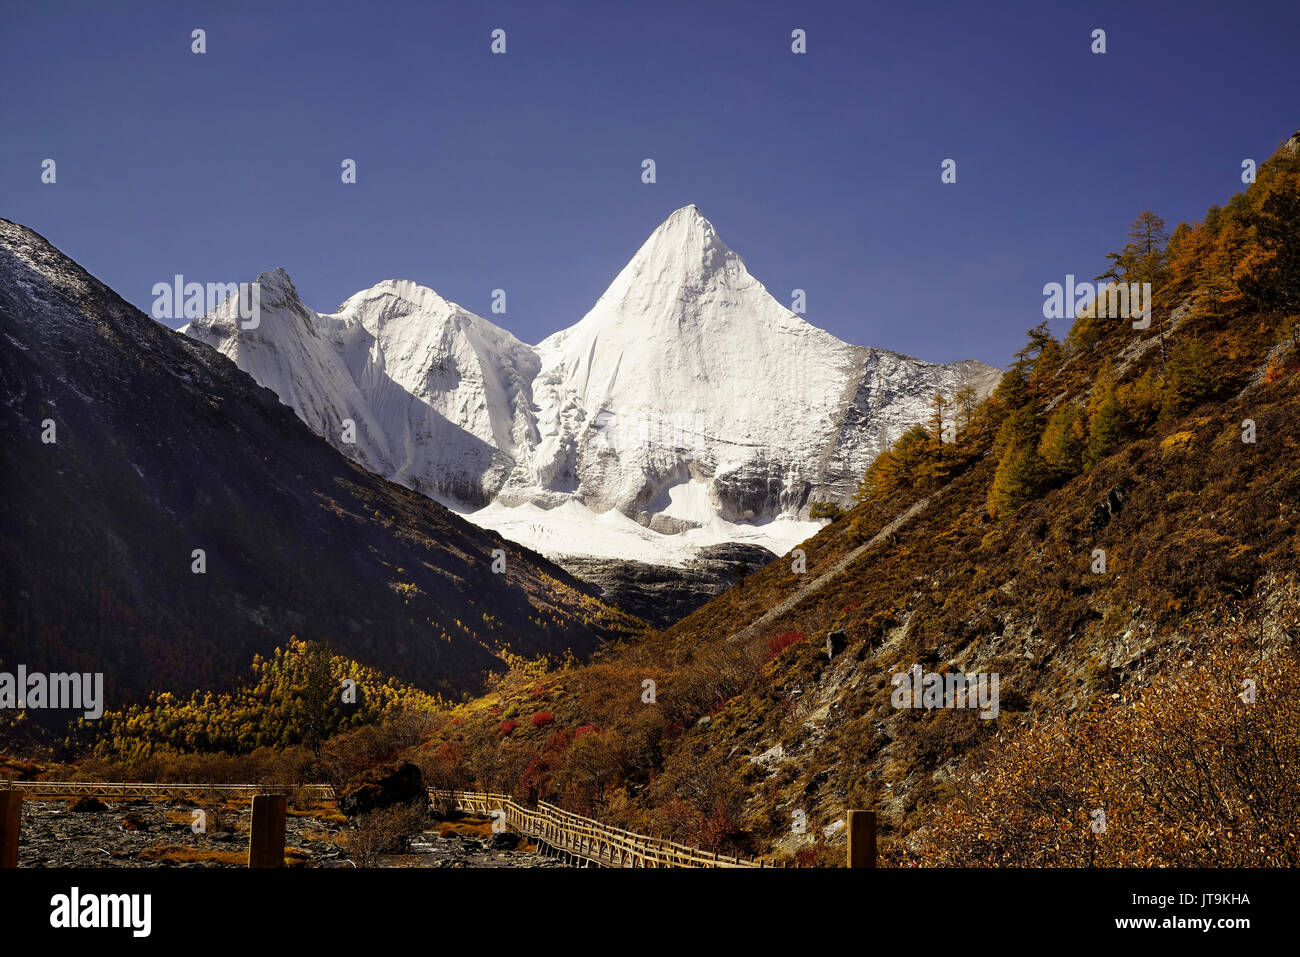 Shangri la, panorama view of holy snow-clad mountain Jambeyang and yellow orange autumn trees in valley with wooden footpath bridge in Yading national Stock Photo